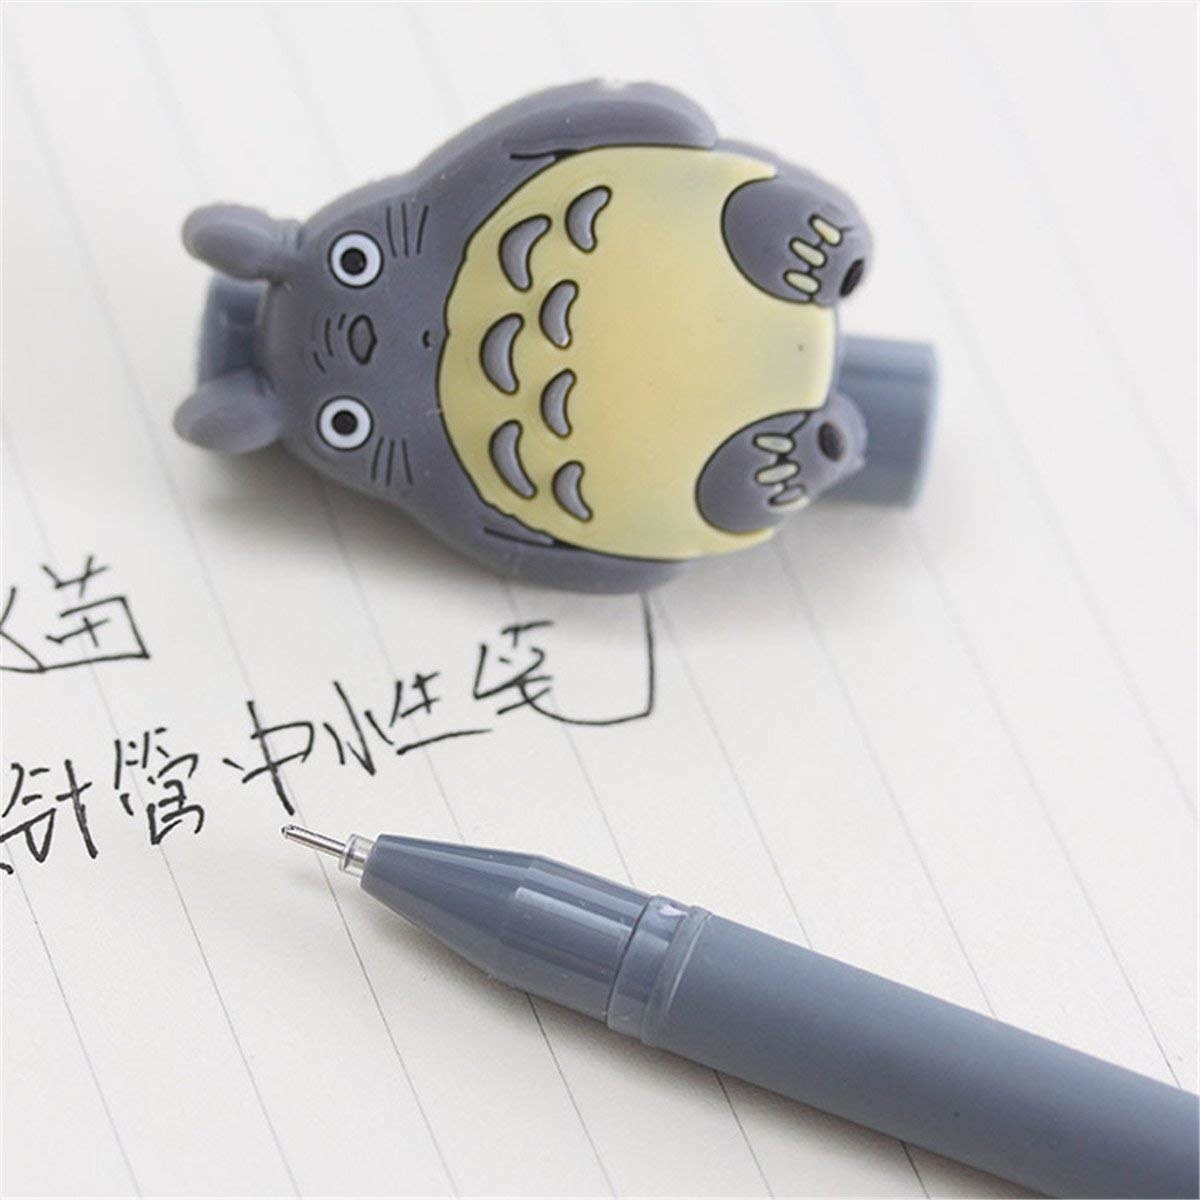 Details about   Wrench Tool Ballpoint Pen Novelty School Office Gift Kid Toy Cute Stationery ~ 